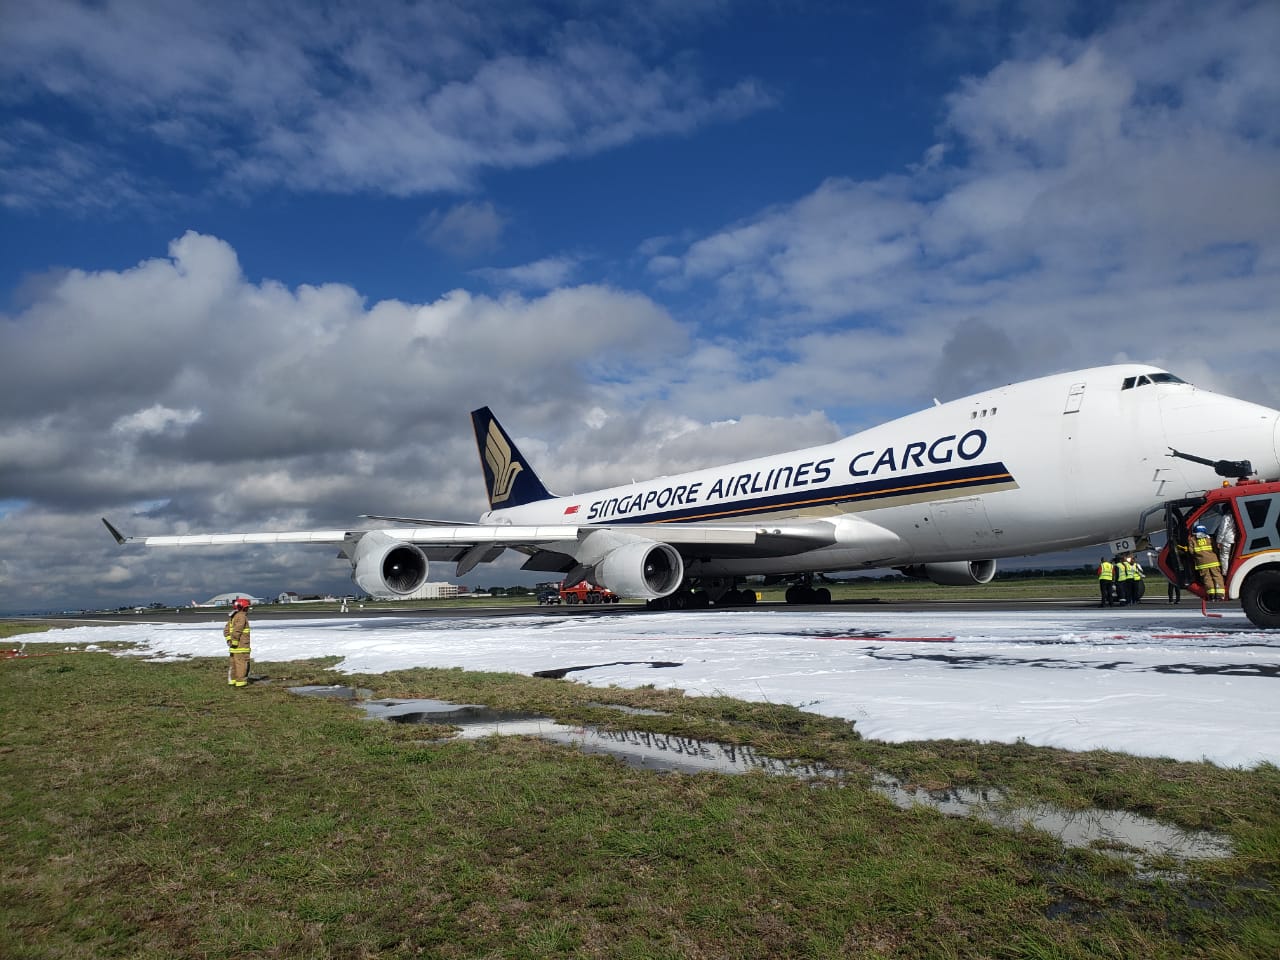 A Singapore Airlines freighter on the runway in Nairobi following a rejected takeoff.